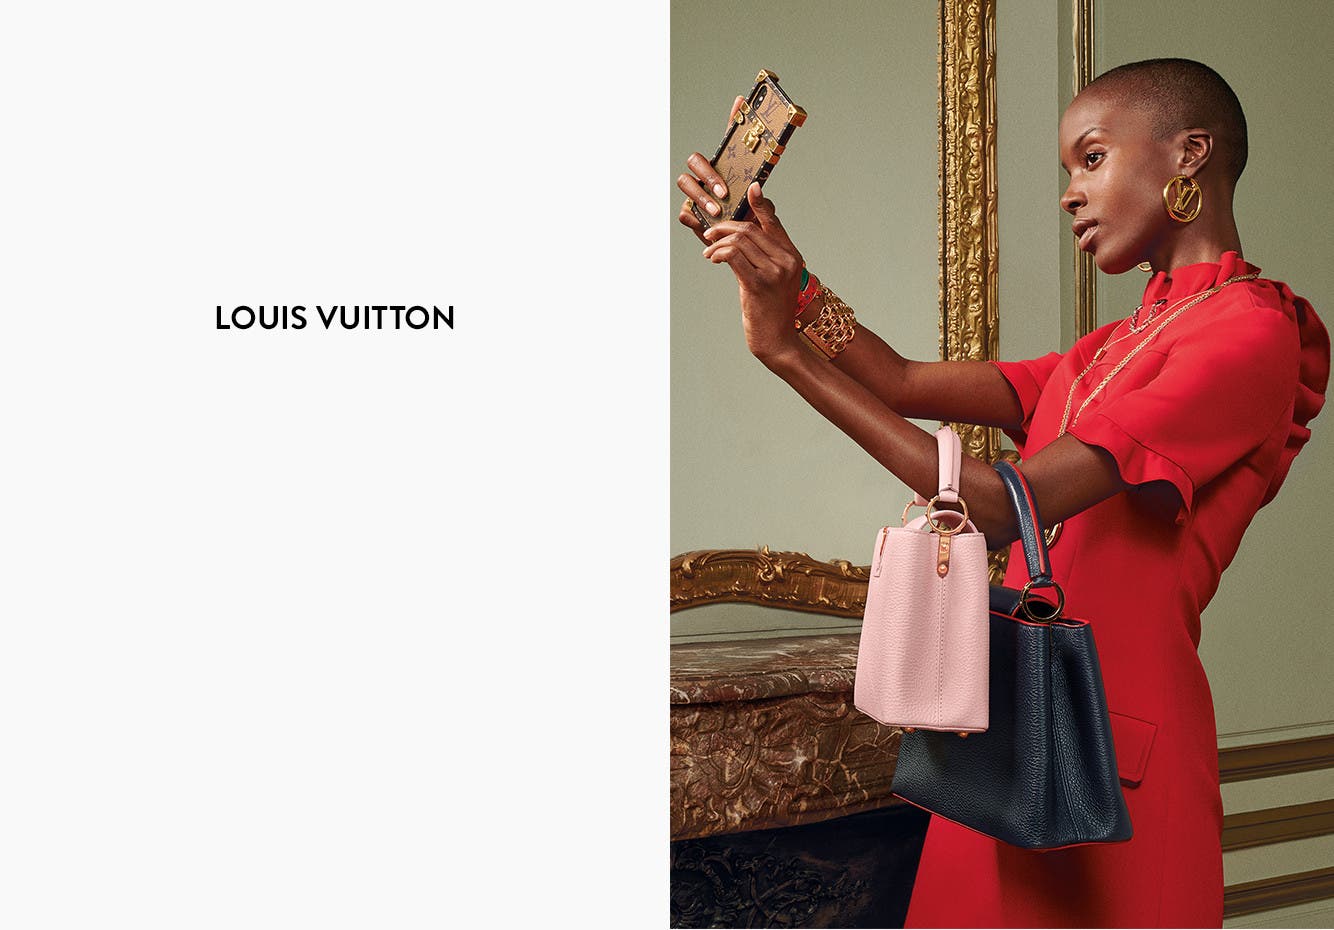 Louis Vuitton Nordstrom Michigan Ave Chicago | Confederated Tribes of the Umatilla Indian ...